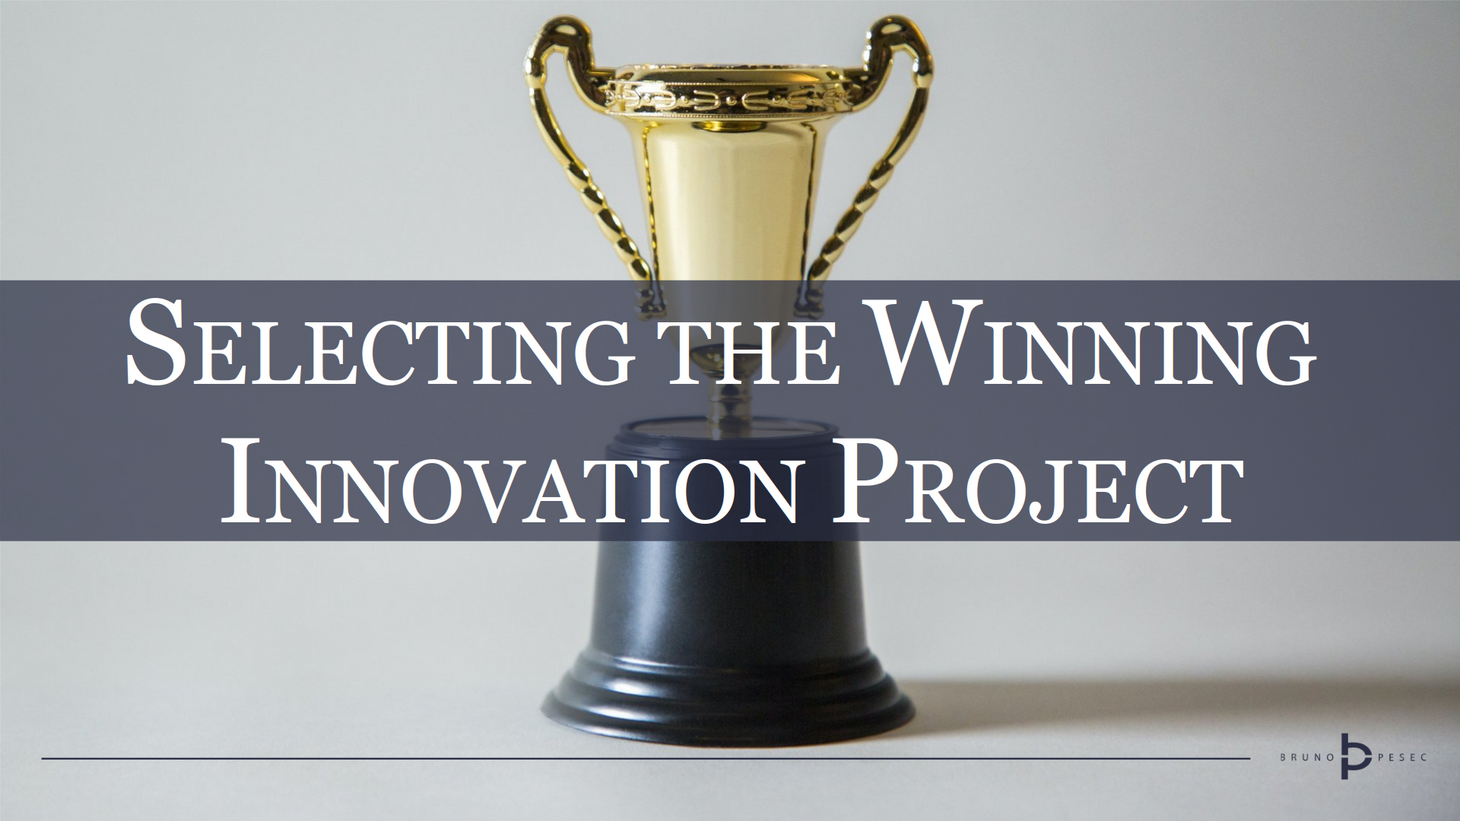 On selecting the winning innovation project